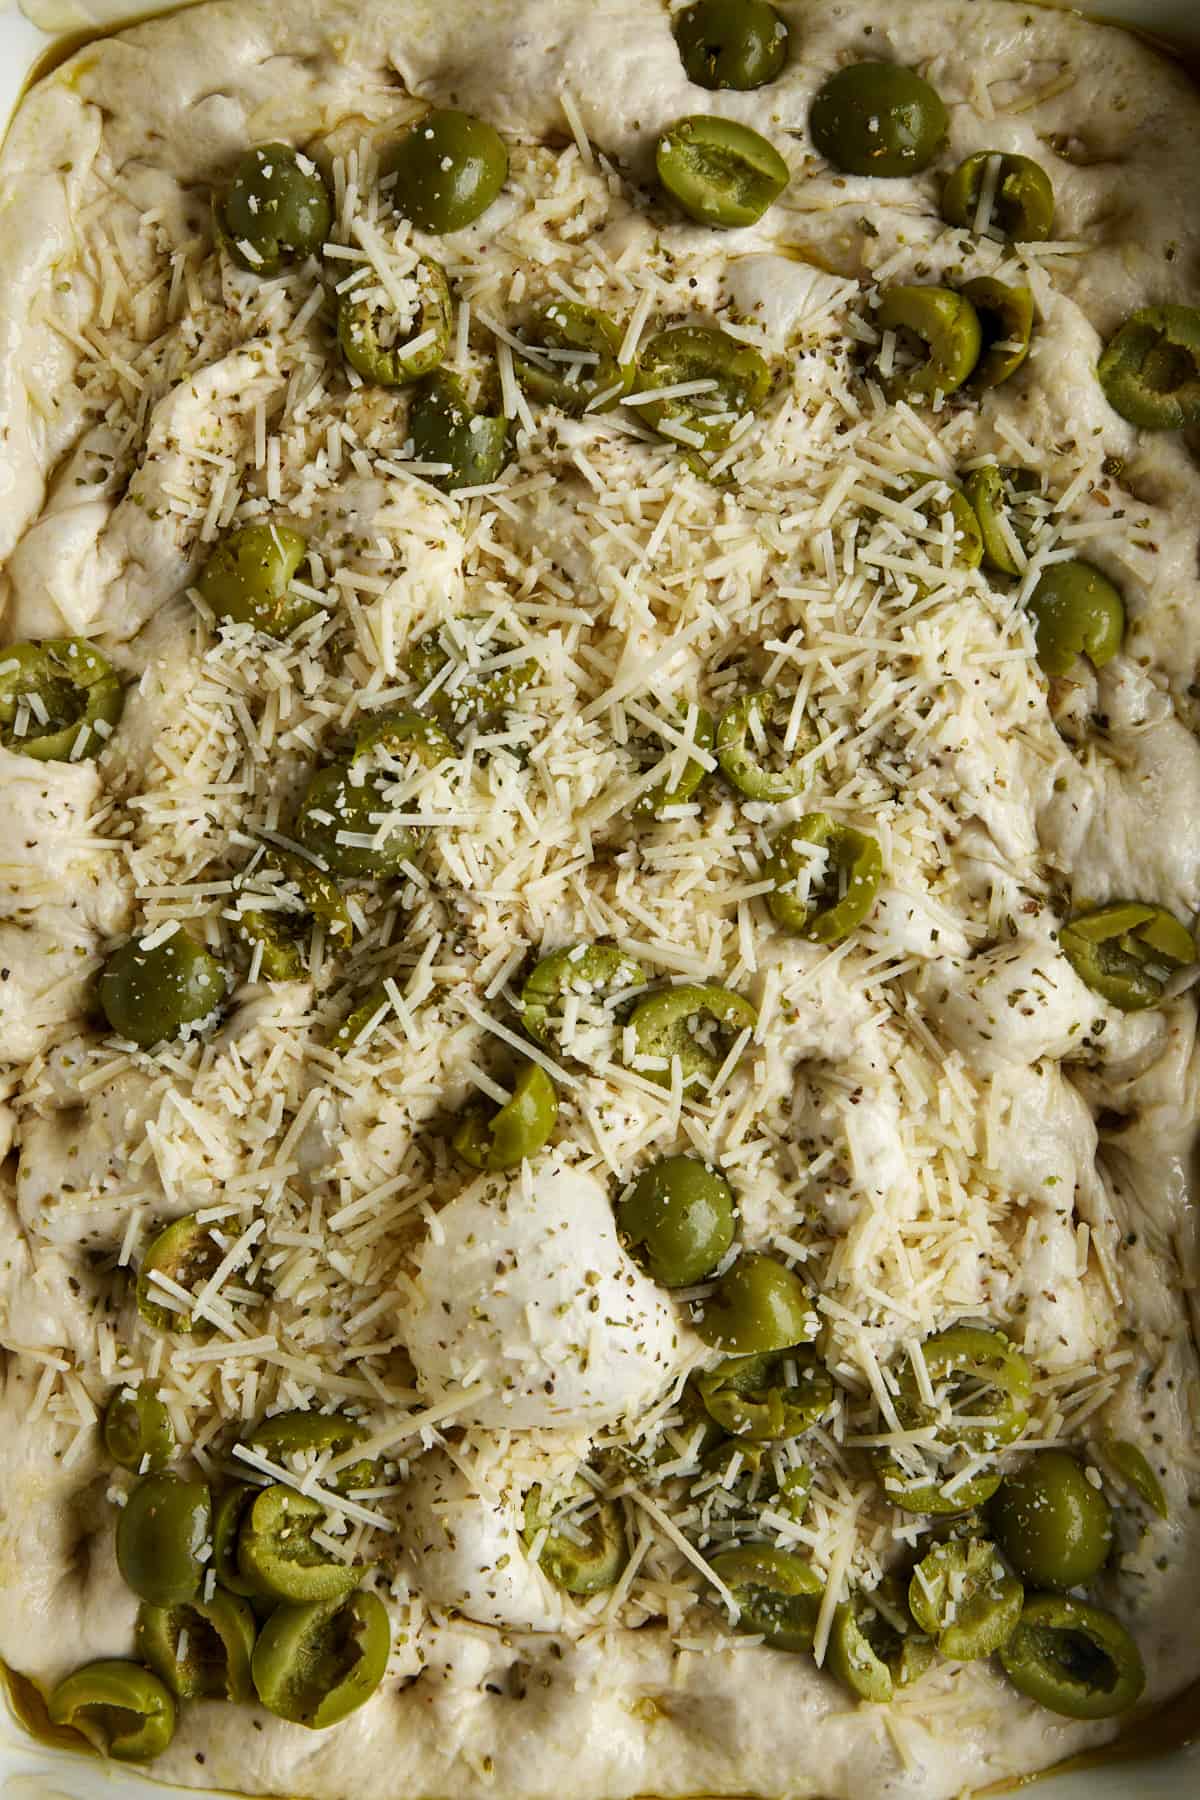 Raw focaccia dough topped with salt, oregano, rosemary, olives, and cheese.